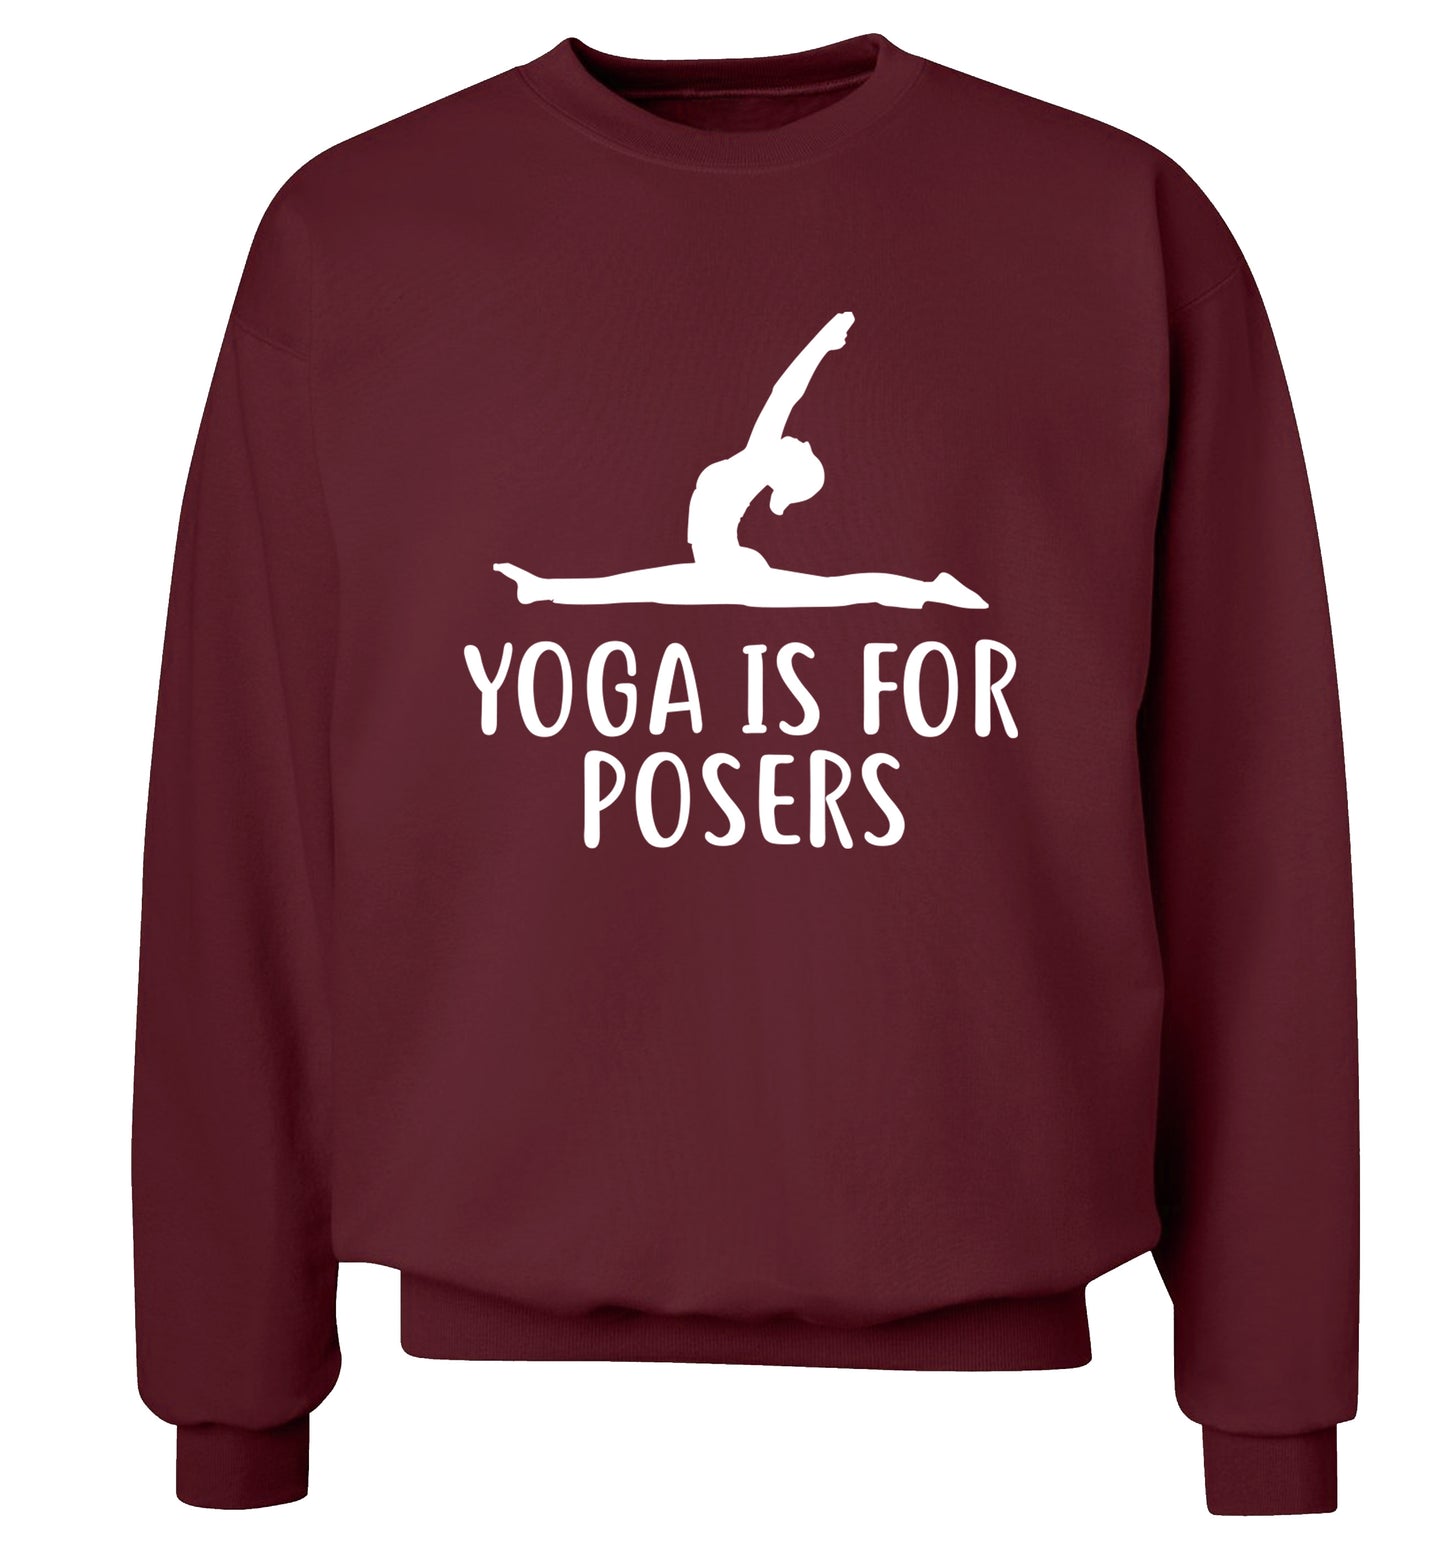 Yoga is for posers Adult's unisex maroon Sweater 2XL